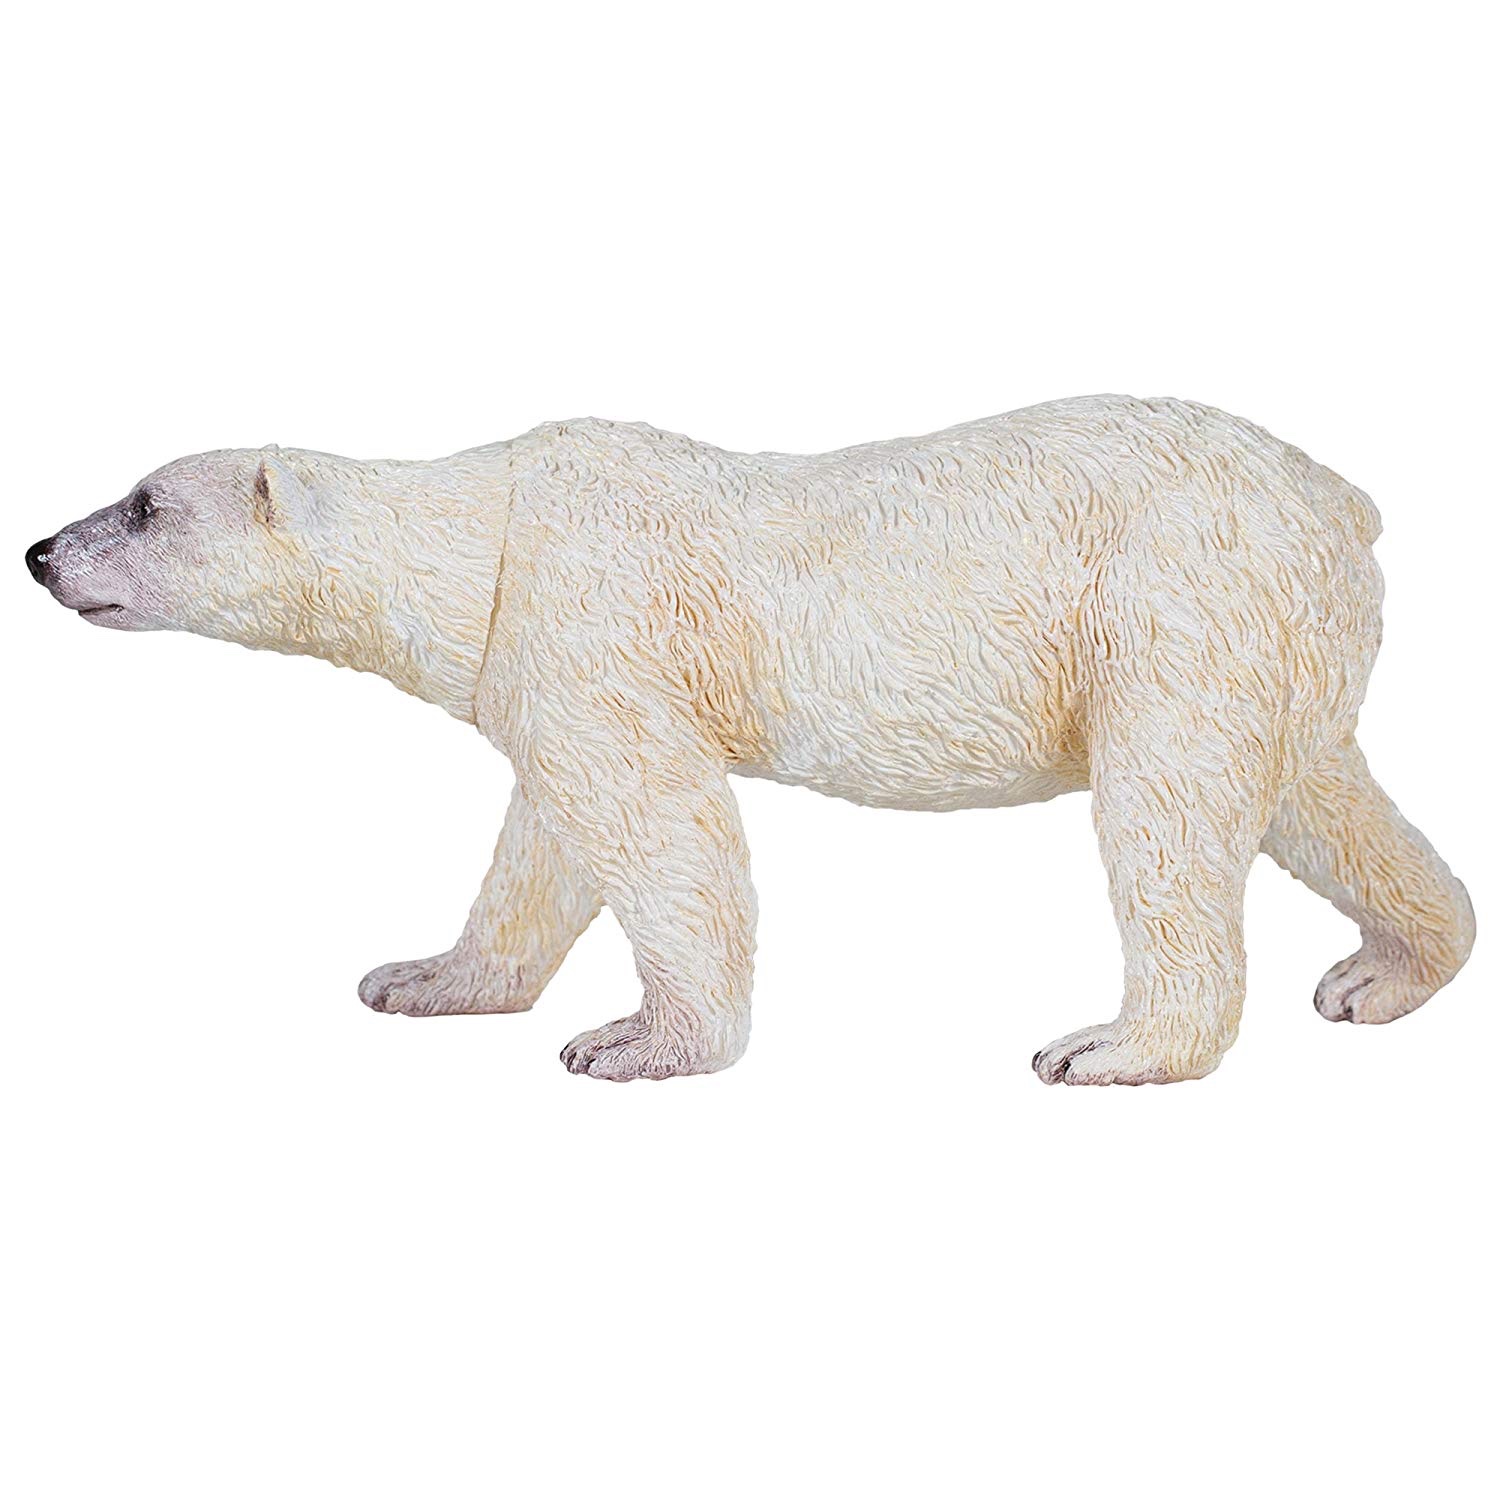 Details about   National Geographic Wildlife Wow Polar Bear Figures 